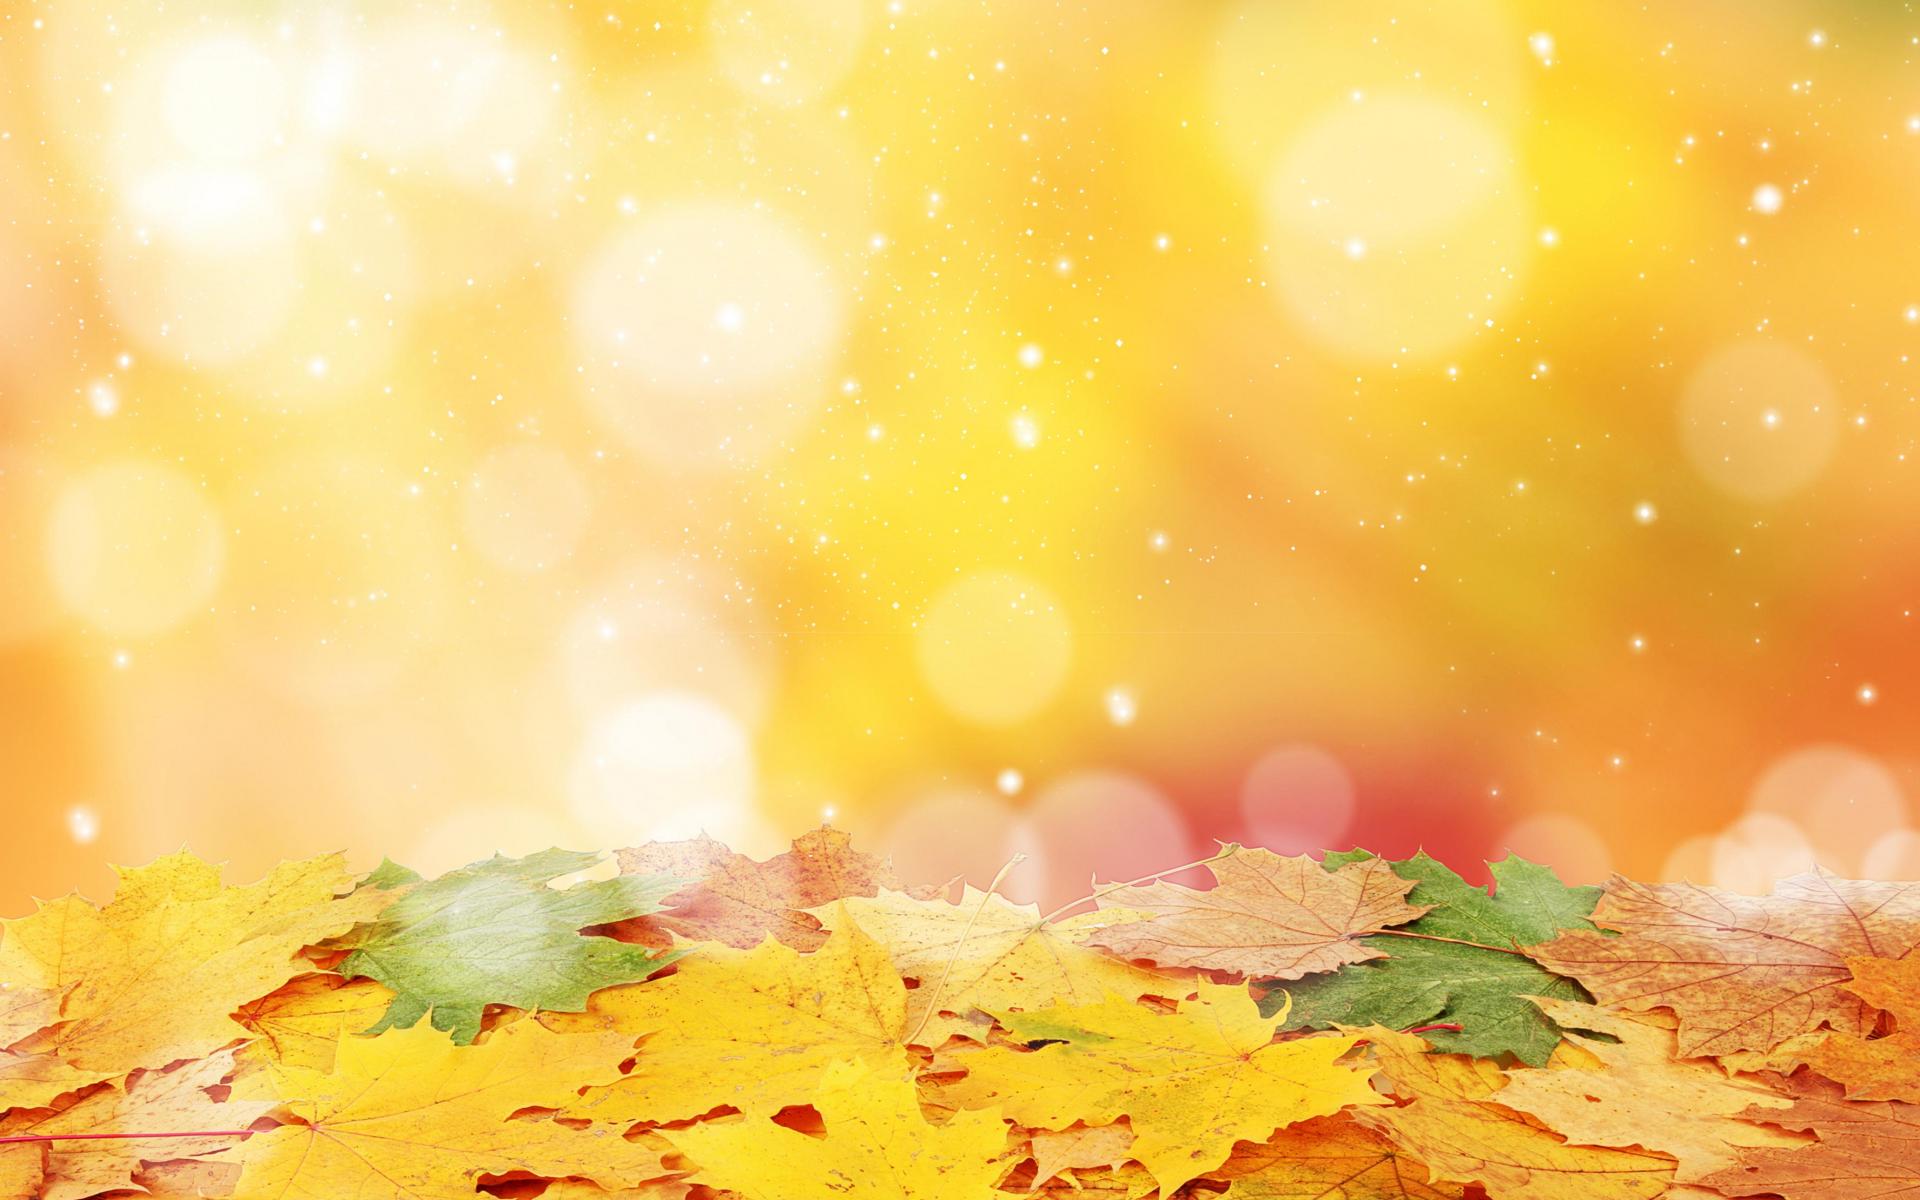 A bright sunny day in autumn - (#129264) - High Quality and ...